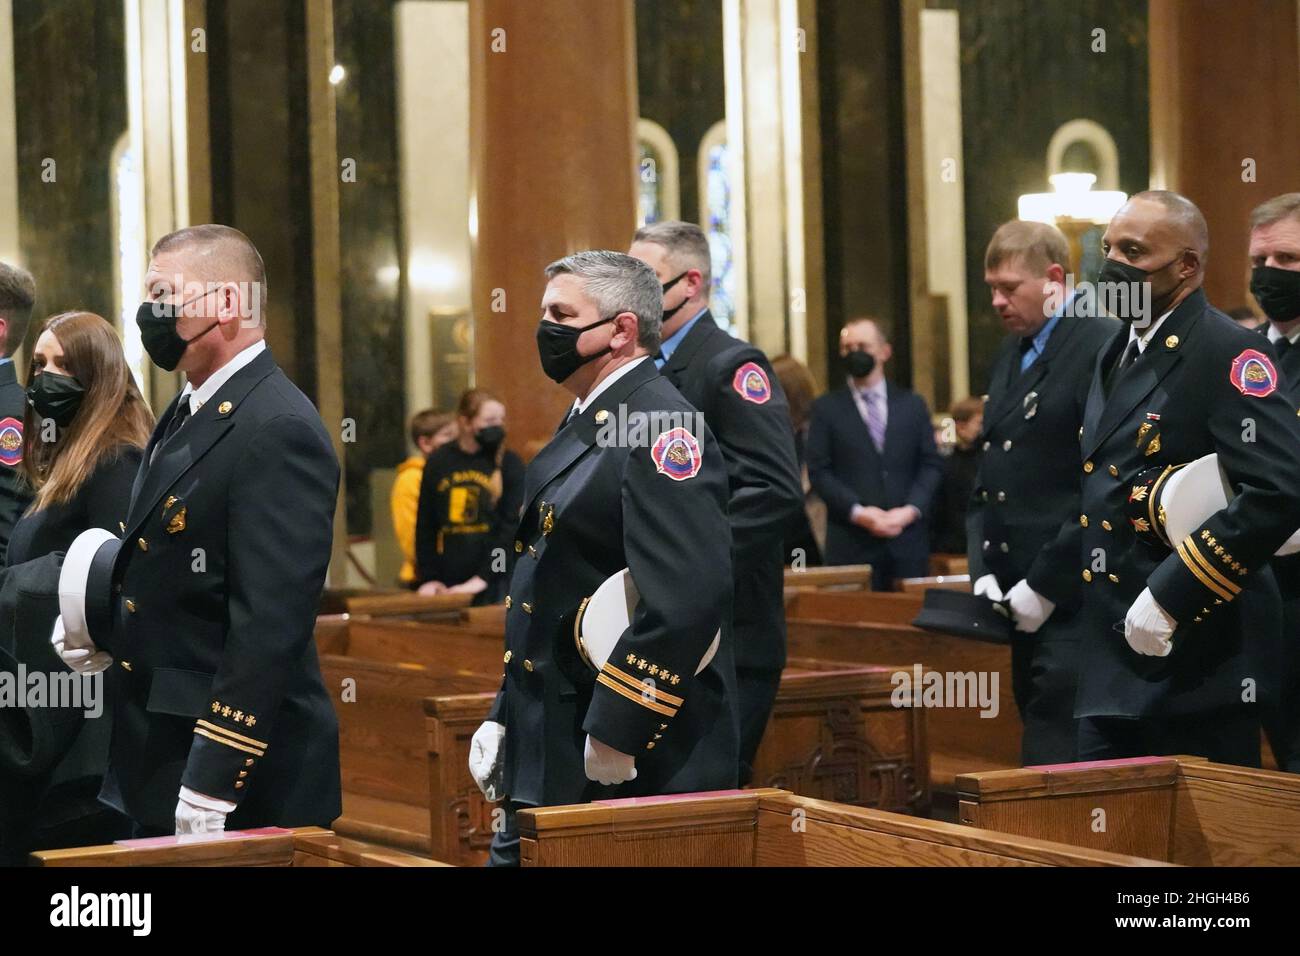 St. Louis, United States. 21st Jan, 2022. St. Louis firefighters file in for the funeral services for the late St. Louis firefighter Ben Polson at the Cathedral Basilica of Saint Louis in St. Louis on Thursday, January 20, 2022. Polson, the first St. Louis firefighter to die in a fire in twenty years, died while battling a vacant house fire on January 13, 2022. Photo by Bill Greenblatt/UPI Credit: UPI/Alamy Live News Stock Photo